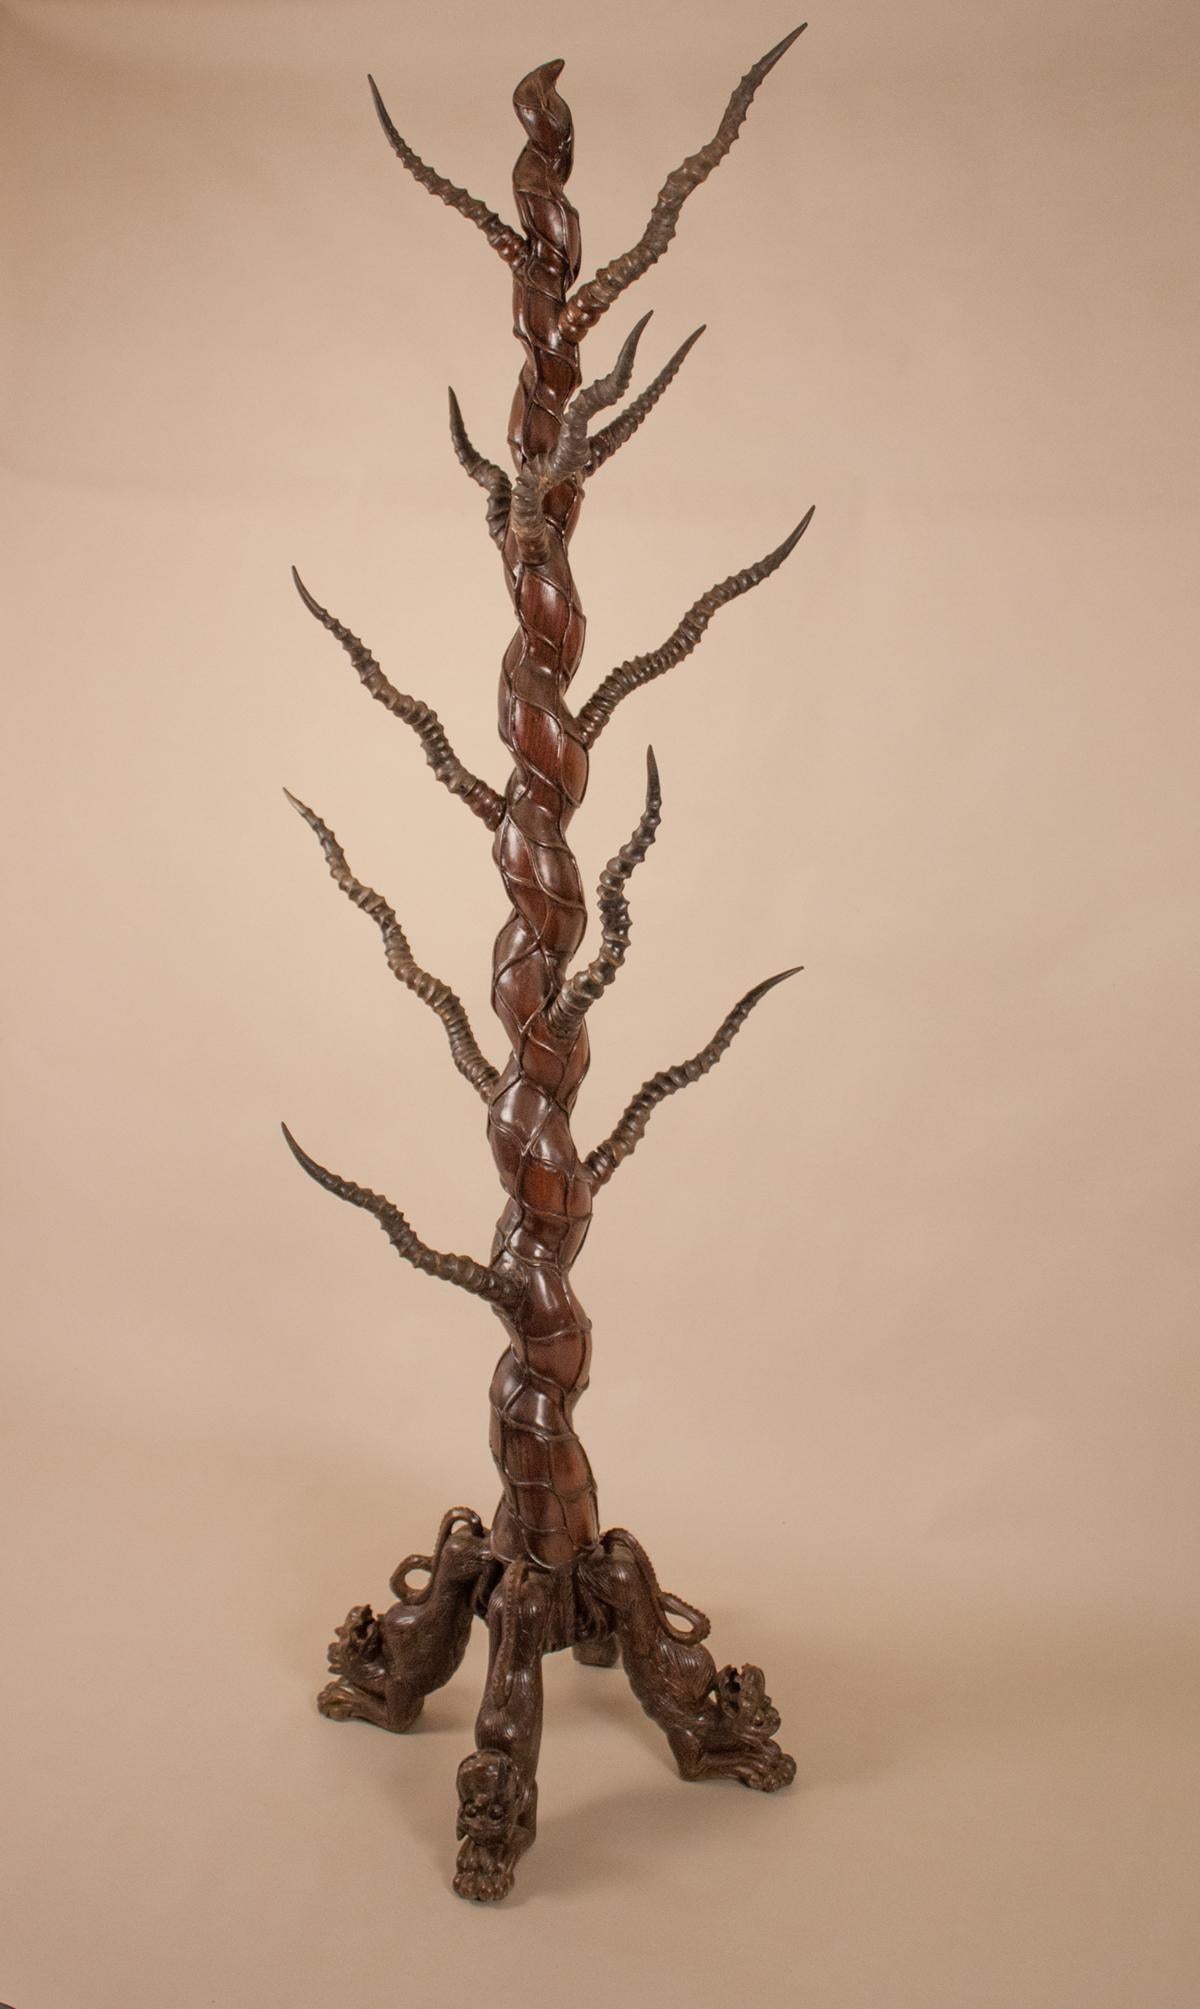 Handcrafted from solid rosewood, this hat or coat stand has 11 authentic Indian gazelle horns on which to hang your hat. The serpentine movement of the stand blends well with the organic shape of the horns. The rack stands 75.50 inches tall on four